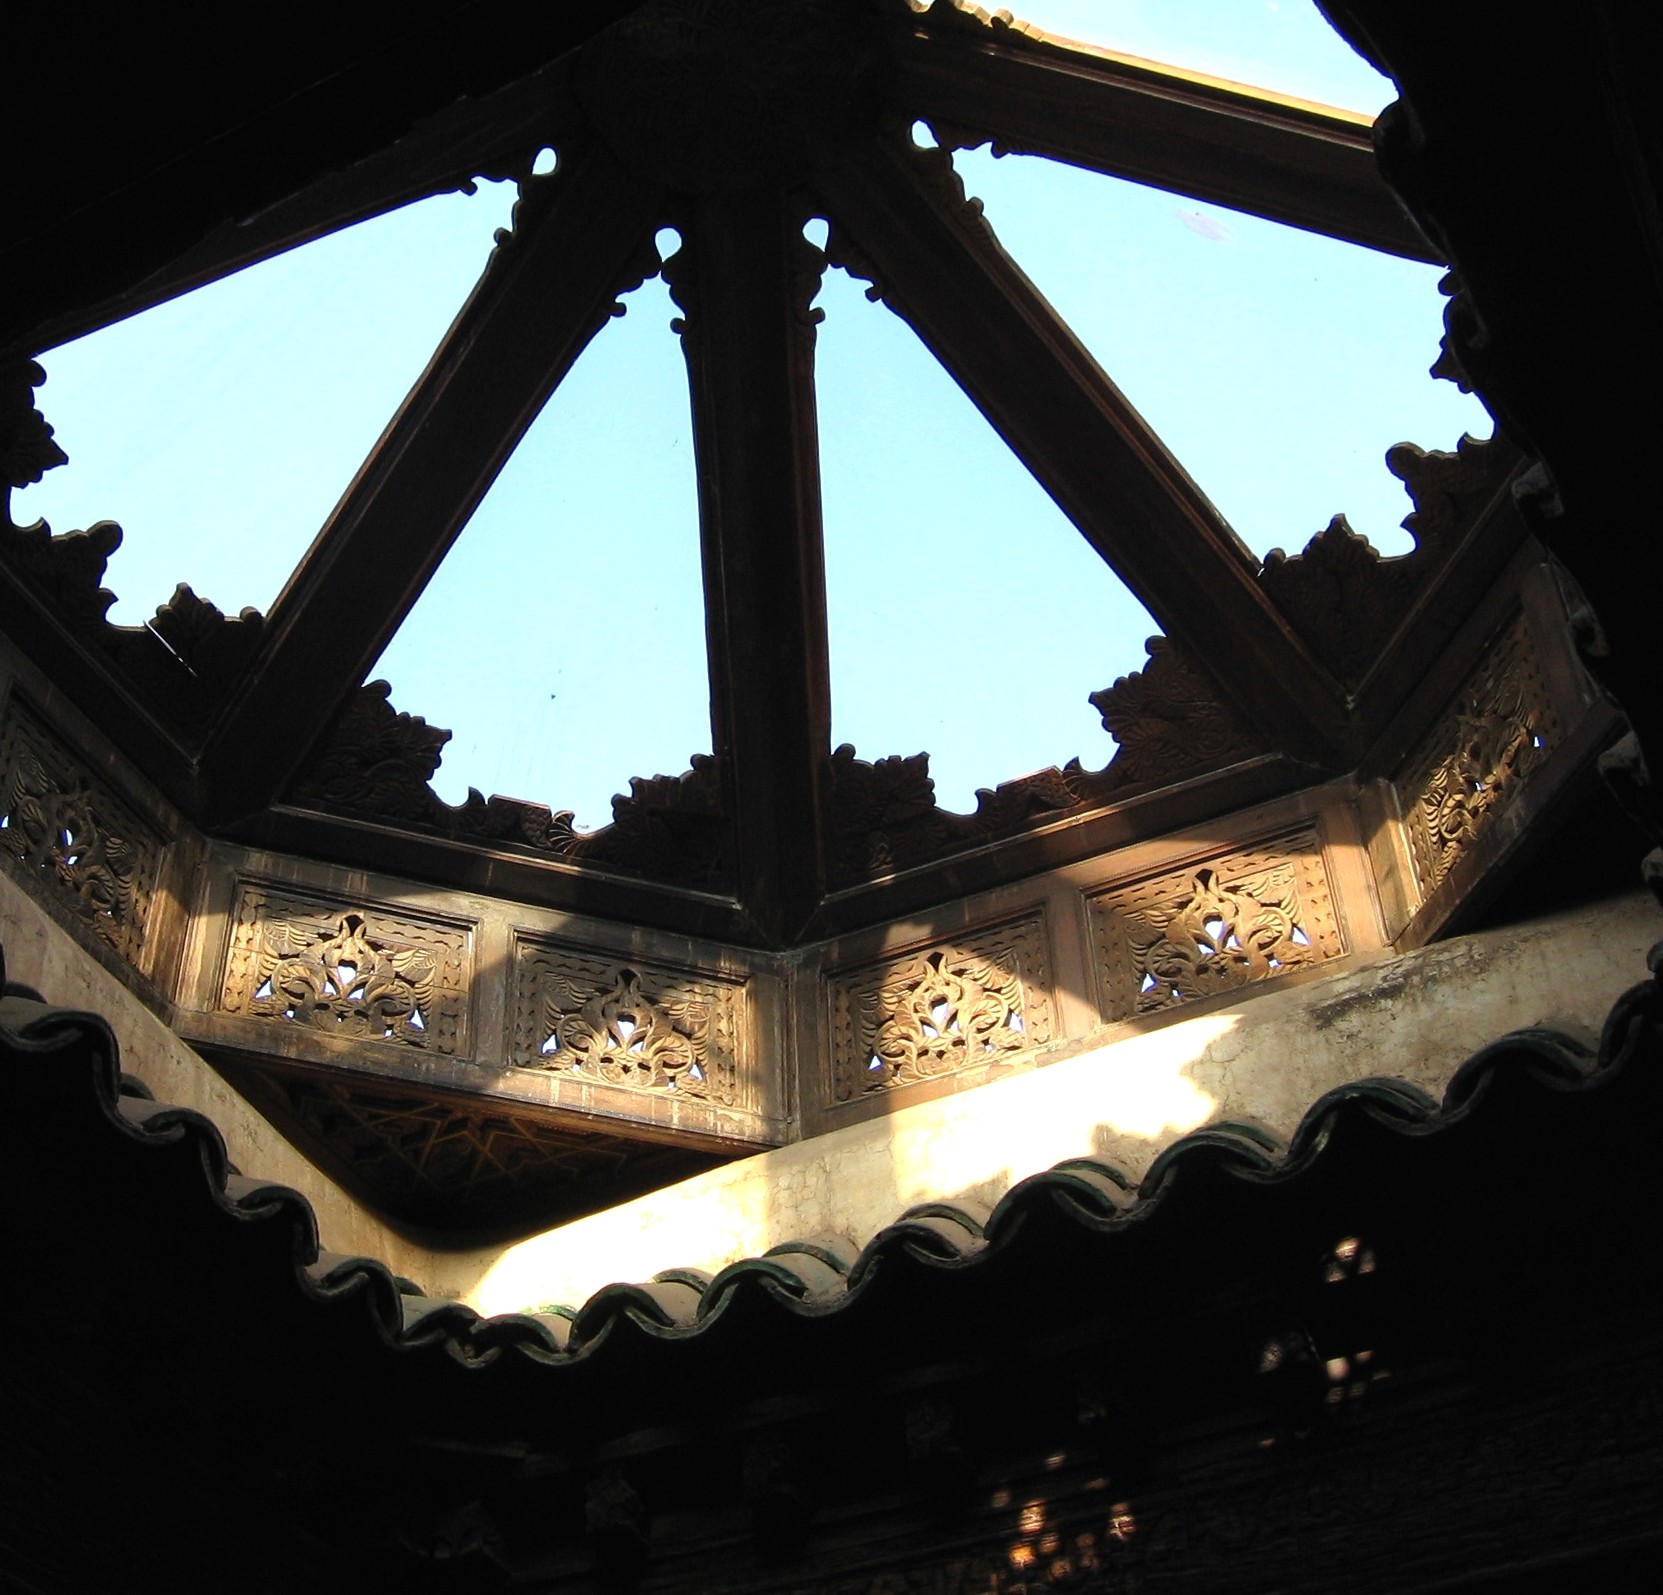 Photography of a very intricate window in a roof, circular with triangular sections through which blue sky is visible. The window frame is delicately engraved and has little pieces of mirror reflecting light.